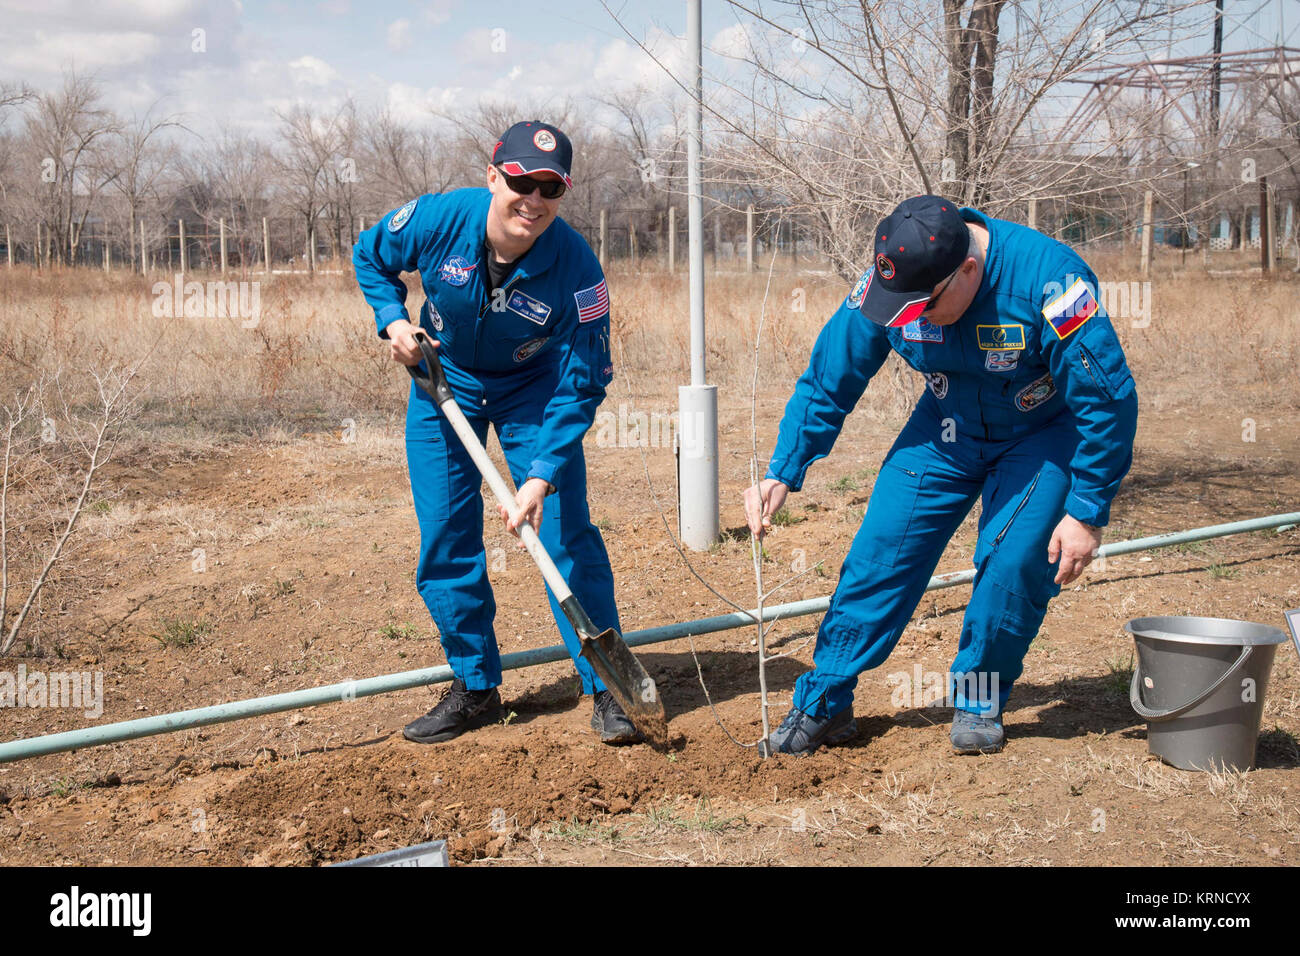 At the Cosmonaut Hotel crew quarters in Baikonur, Kazakhstan, Expedition 51 crewmember Fyodor Yurchikhin of the Russian Federal Space Agency (Roscosmos, right) helps crewmate Jack Fischer of NASA (left) plant a tree in Fischer’s name April 13 as part of traditional pre-launch activities. Fischer and Yurchikhin will liftoff April 20 from the Baikonur Cosmodrome on the Soyuz MS-04 spacecraft for a four and a half month mission on the International Space Station.  NASA/Victor Zelentsov Soyuz MS-04 crew during the tree planting ceremony Stock Photo